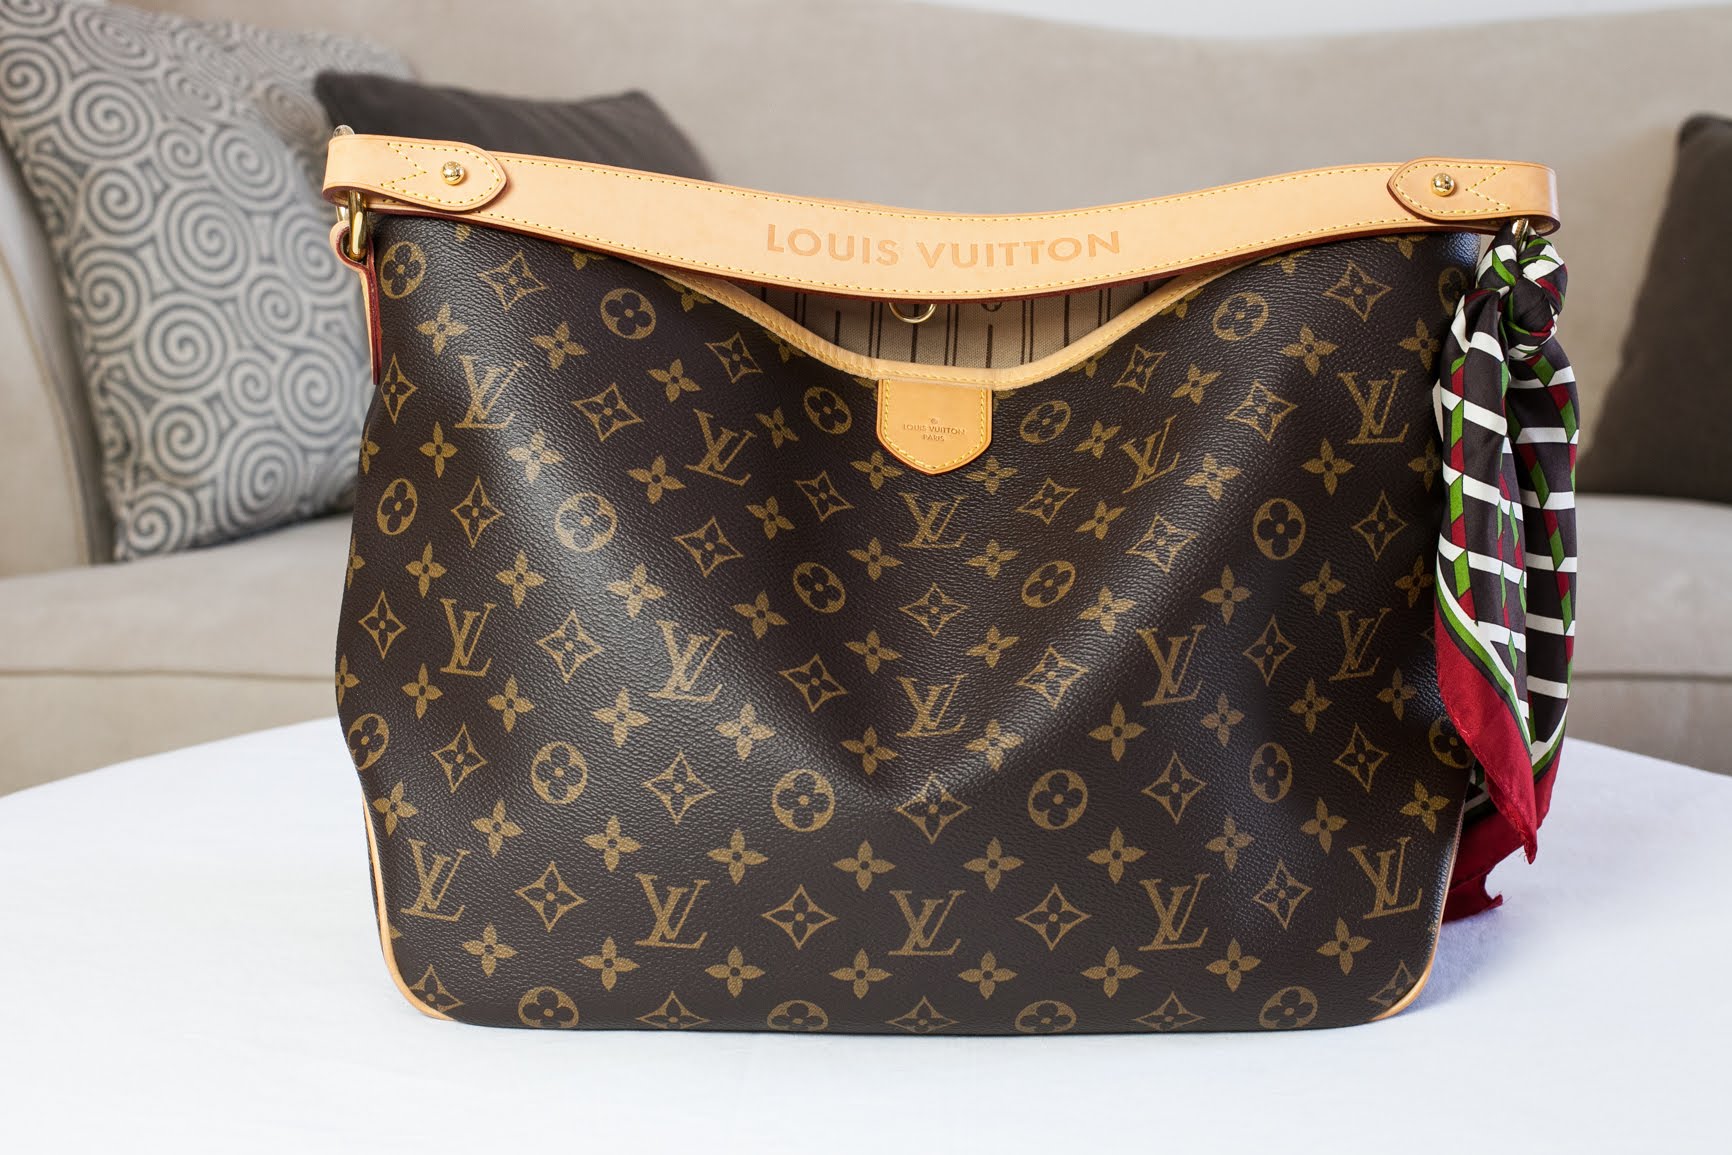 Louis Vuitton Delightful PM Review - YouTube